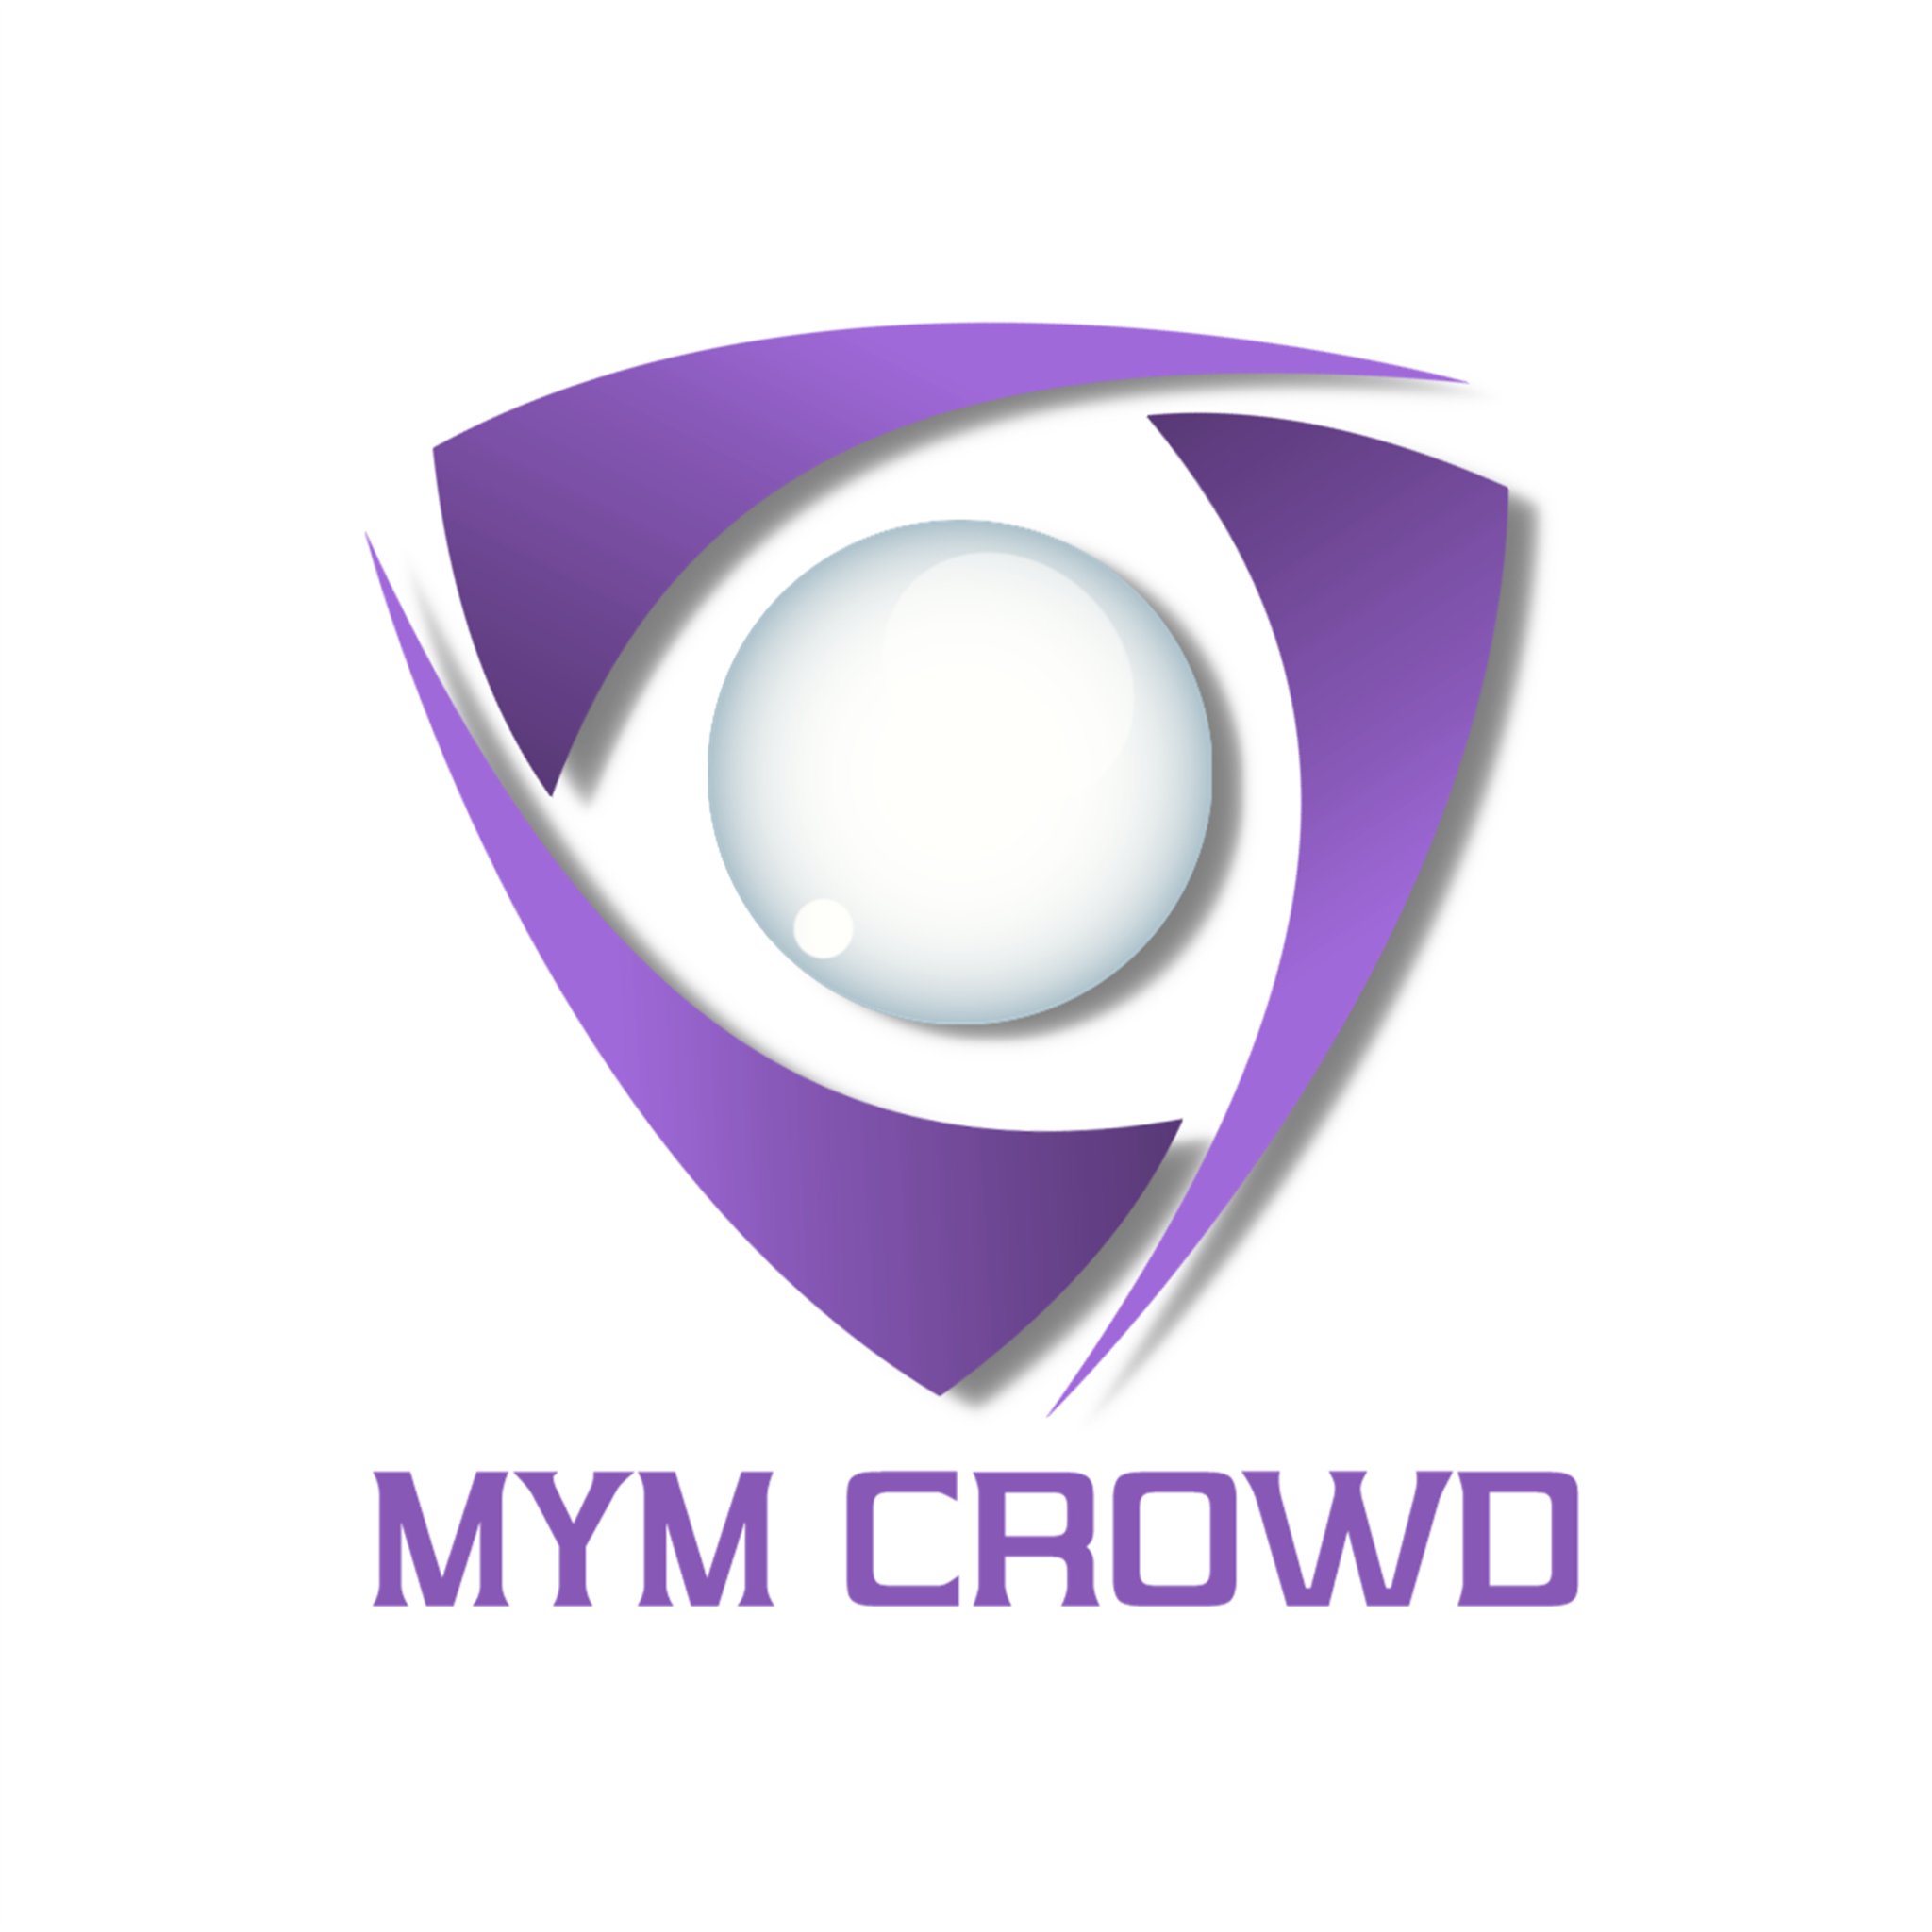 MYM Crowd is a crowdsourcing platform to arrange the funding for first dedicated and GSA approved E-Commerce Platform for U.S. Federal Government Acquisitions.